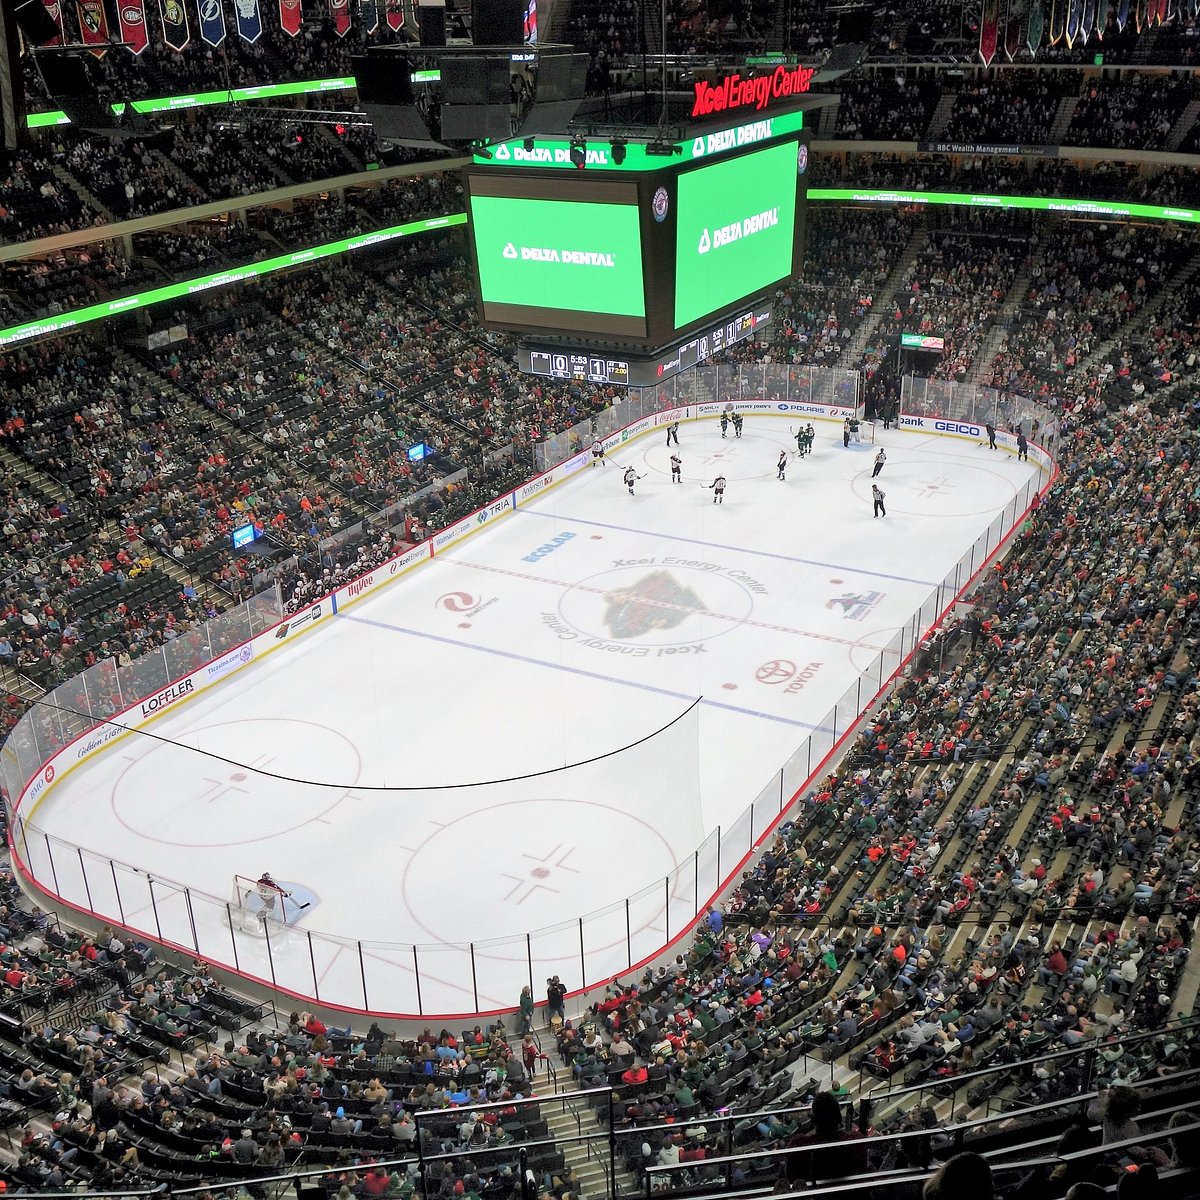 Minnesota Wild - 1200: Official seating capacity at TRIA